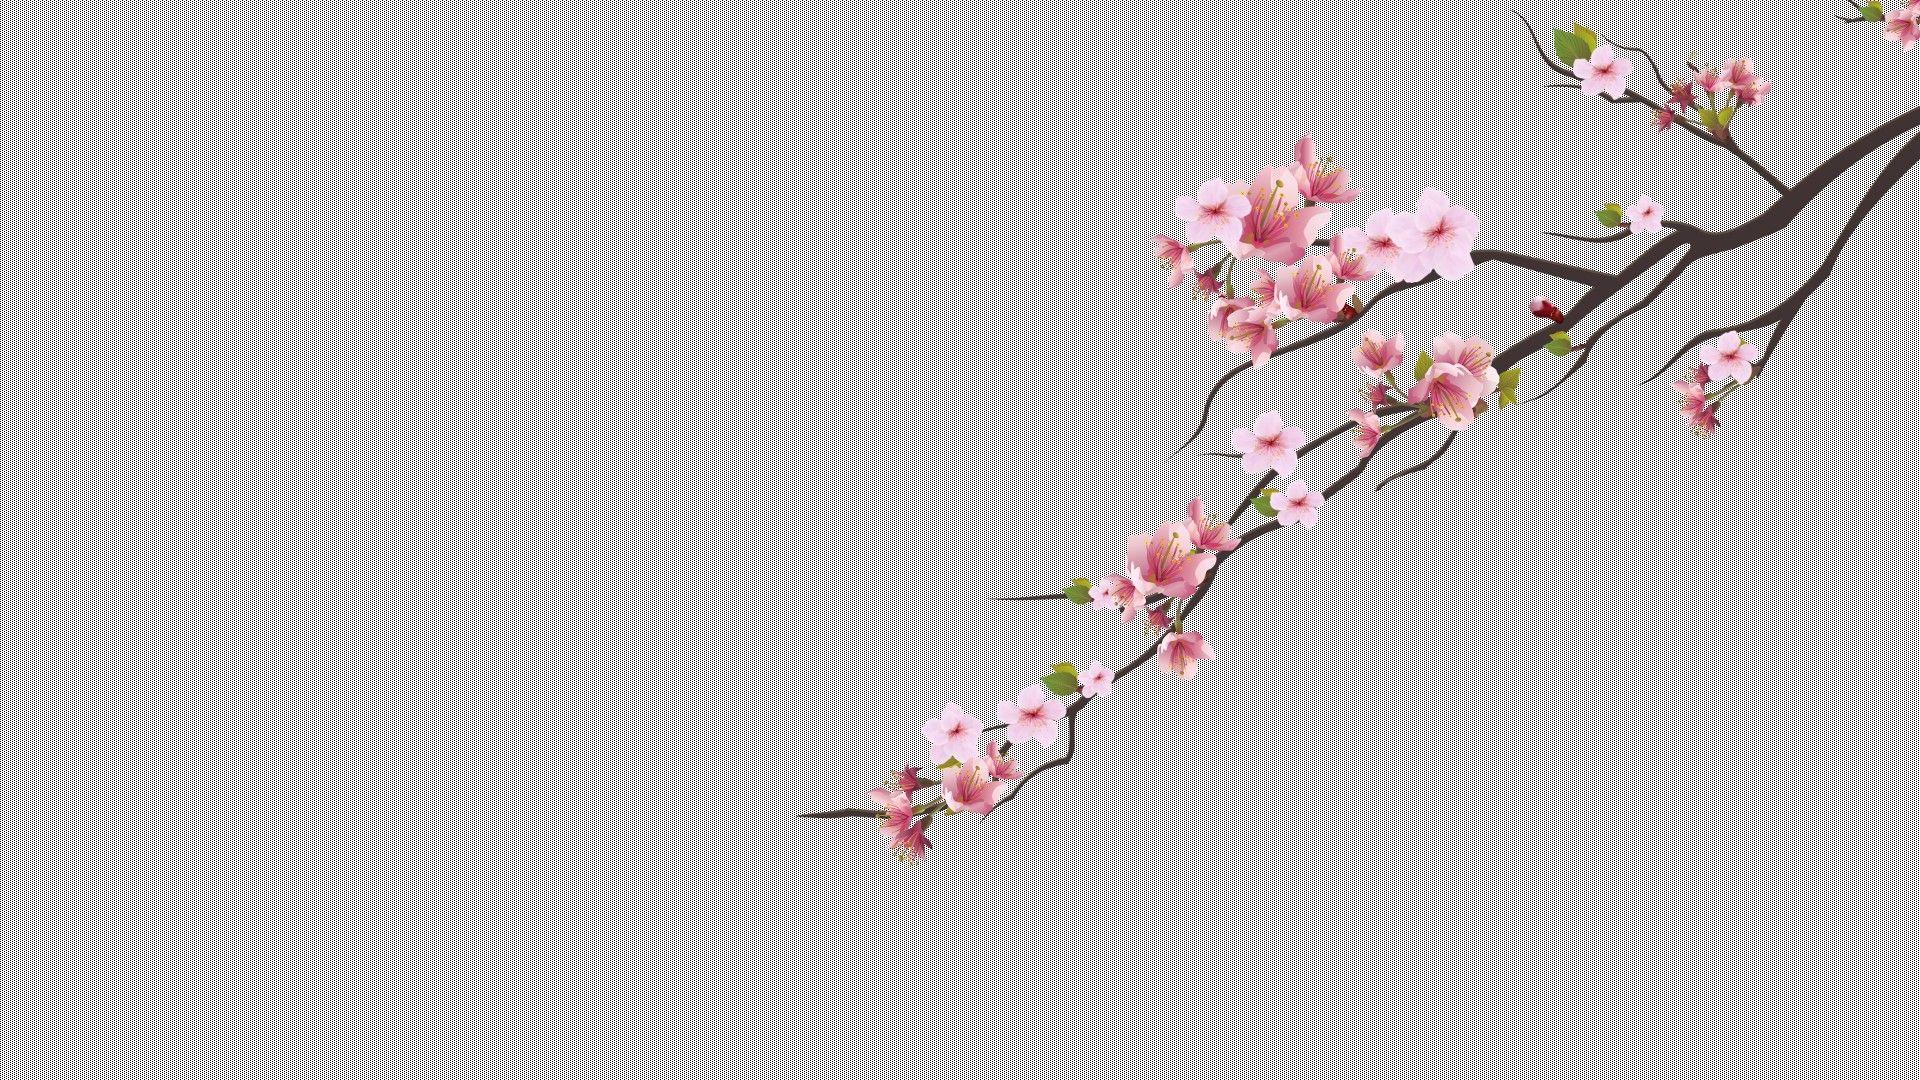 Minimalist Floral Wallpapers - Top Free Minimalist Floral Backgrounds